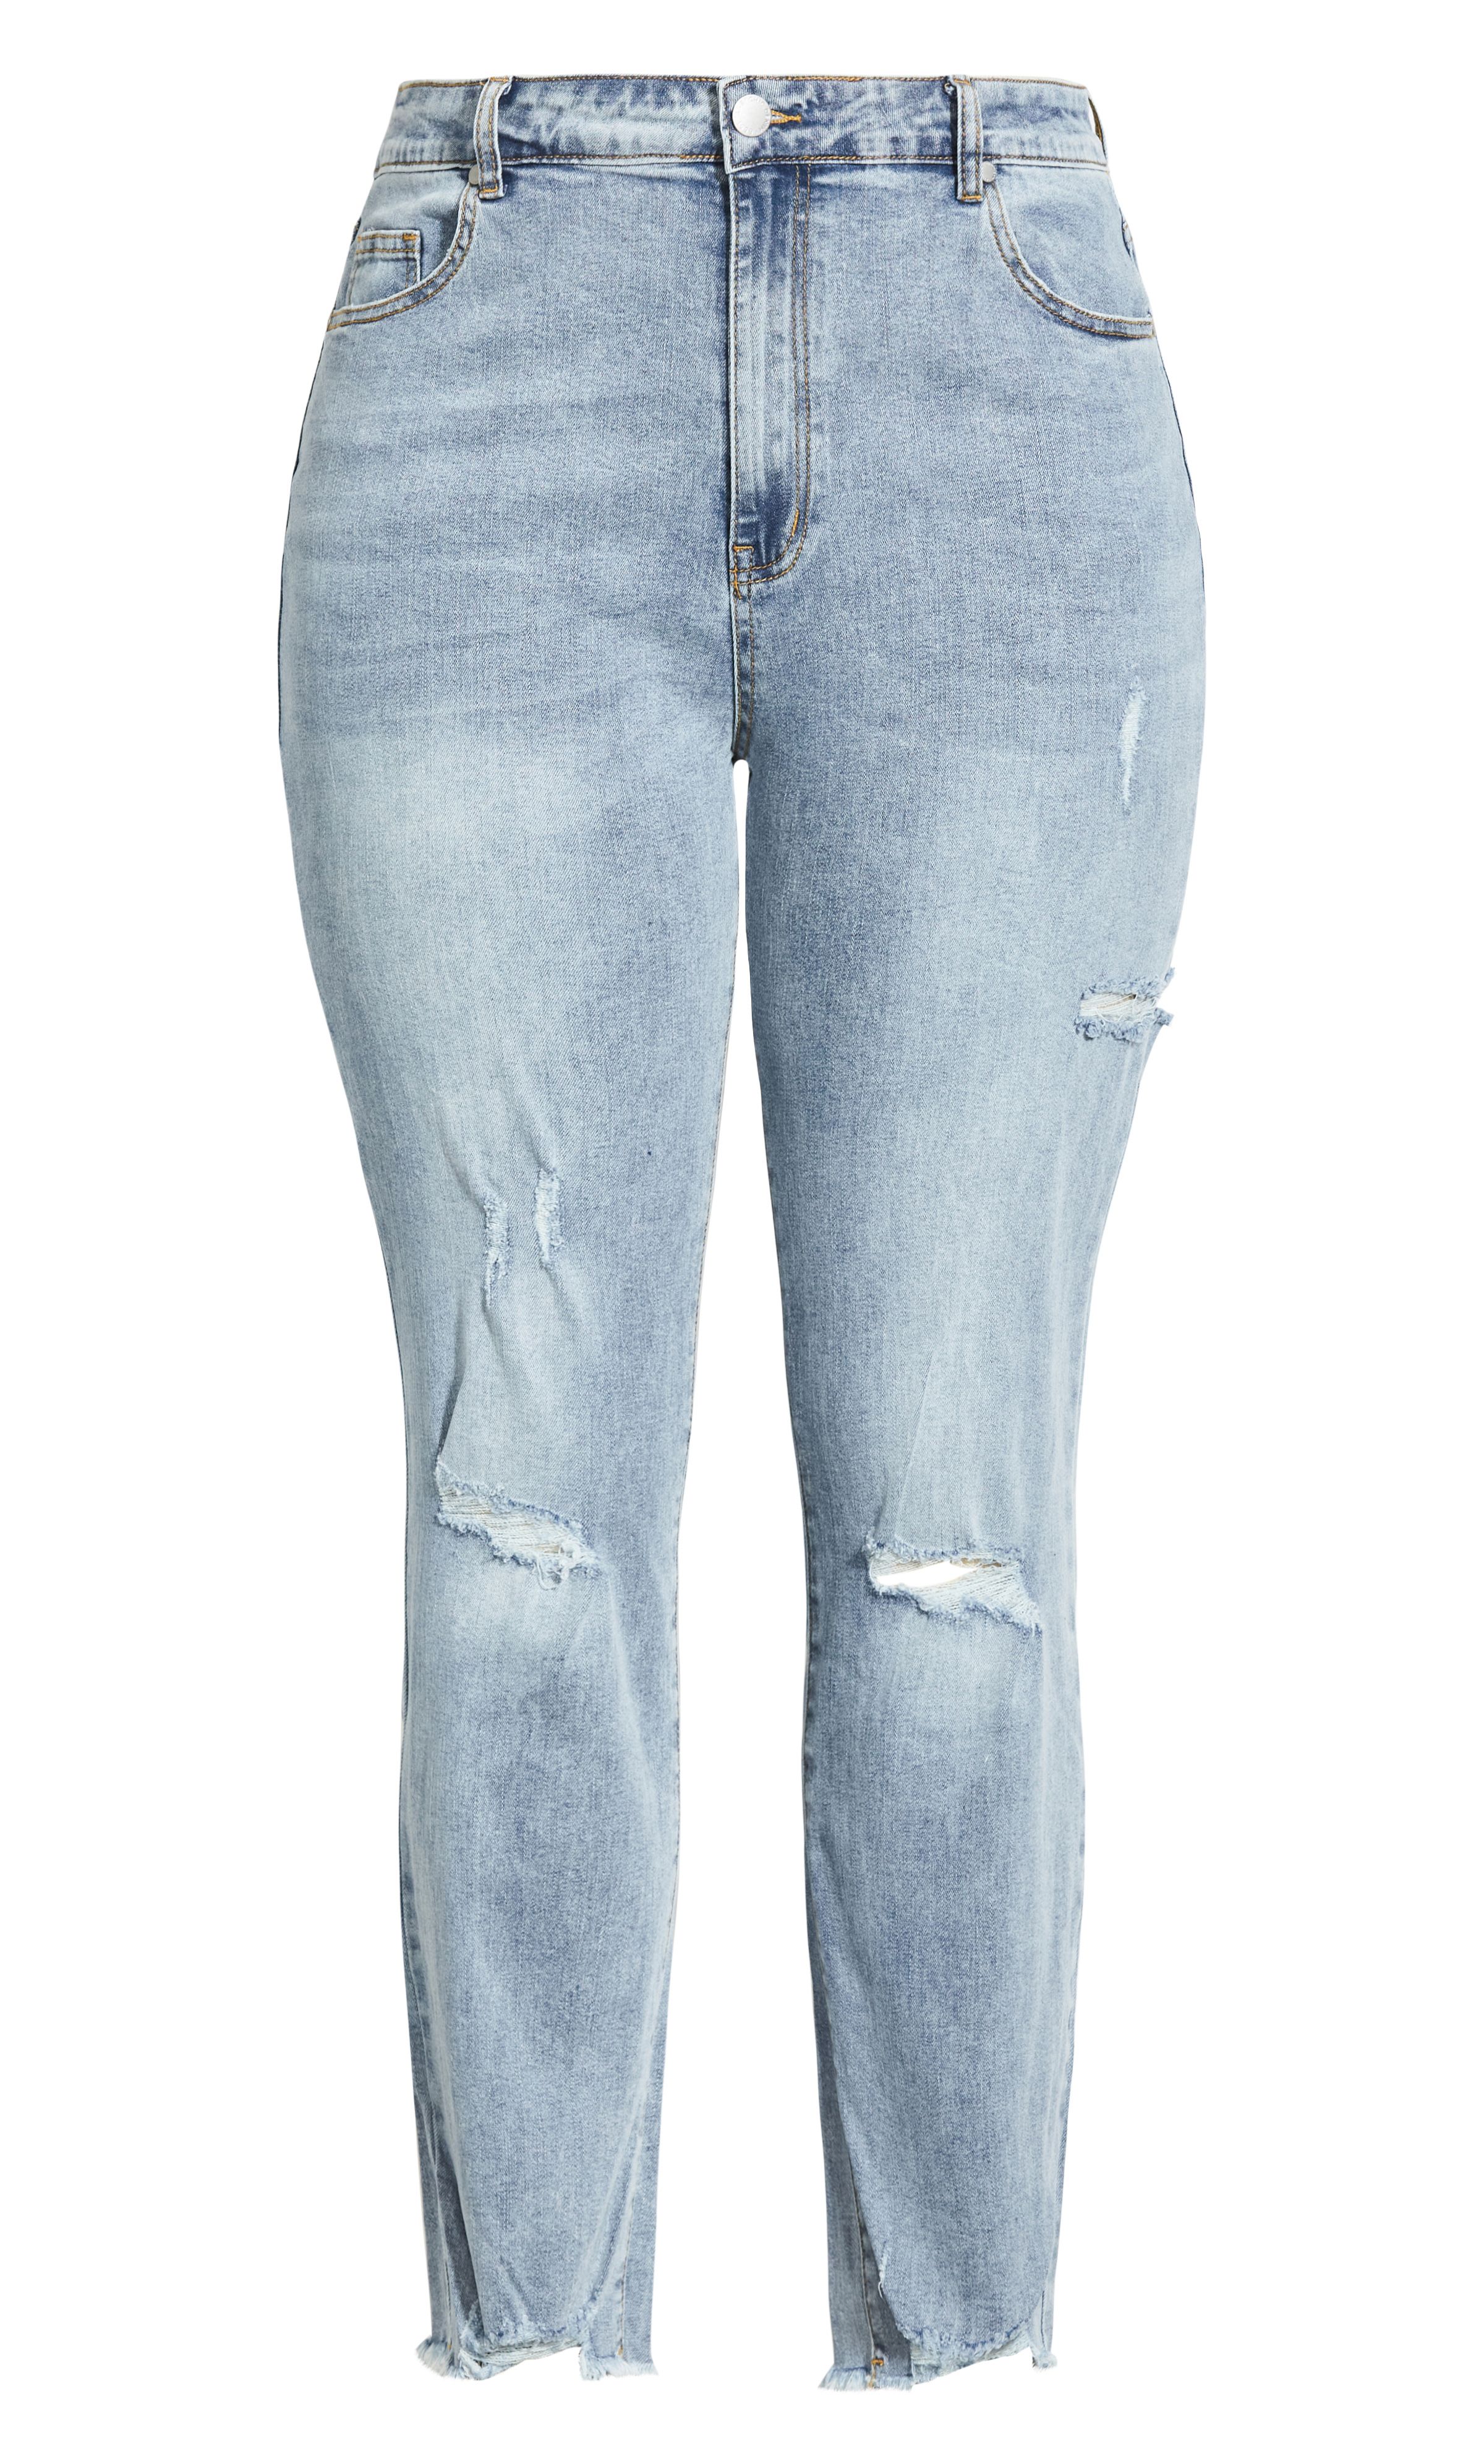 Tee up a cute casual fit in the Harley Thigh Split Jean, flaunting curve-flaunting tailoring for an hourglass body shape. This pair can be dressed up or down depending on the occasion, featuring a slim tapered leg and trending light wash denim. Key Features Include: - Fit for an hourglass body shape - Tapered slim leg - Mid rise - Single button and fly fastening - Belt looped waistline - 5-pocket denim styling - Stretch cotton blend fabrication - Distressed detail - High denim fibre retention to maintain shape - Signature Chic Denim hardware throughout zips, buttons and rivets - Full length - Frayed cuffs Team with a sexy off shoulder top and strappy stilettos for your next night out!